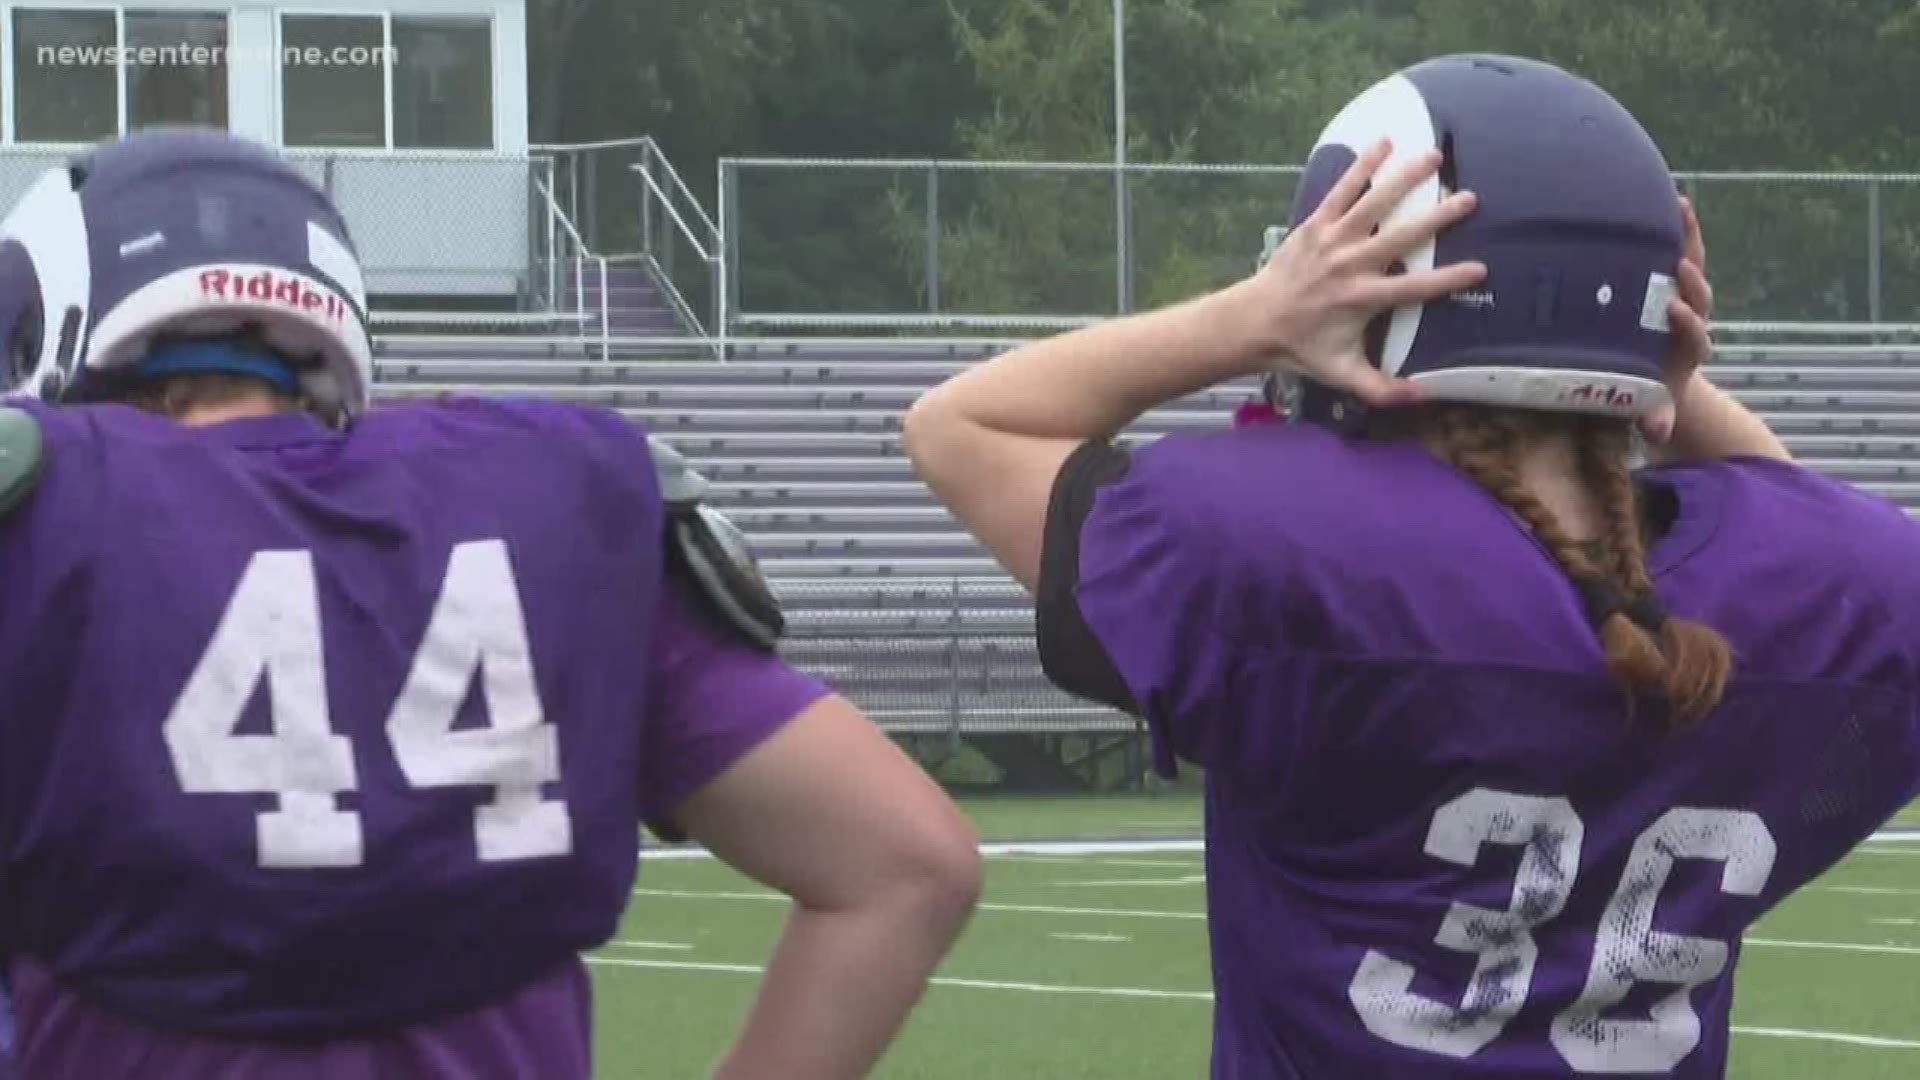 Elizabeth Drelich is one of the few girls in Maine to tackle high school football.